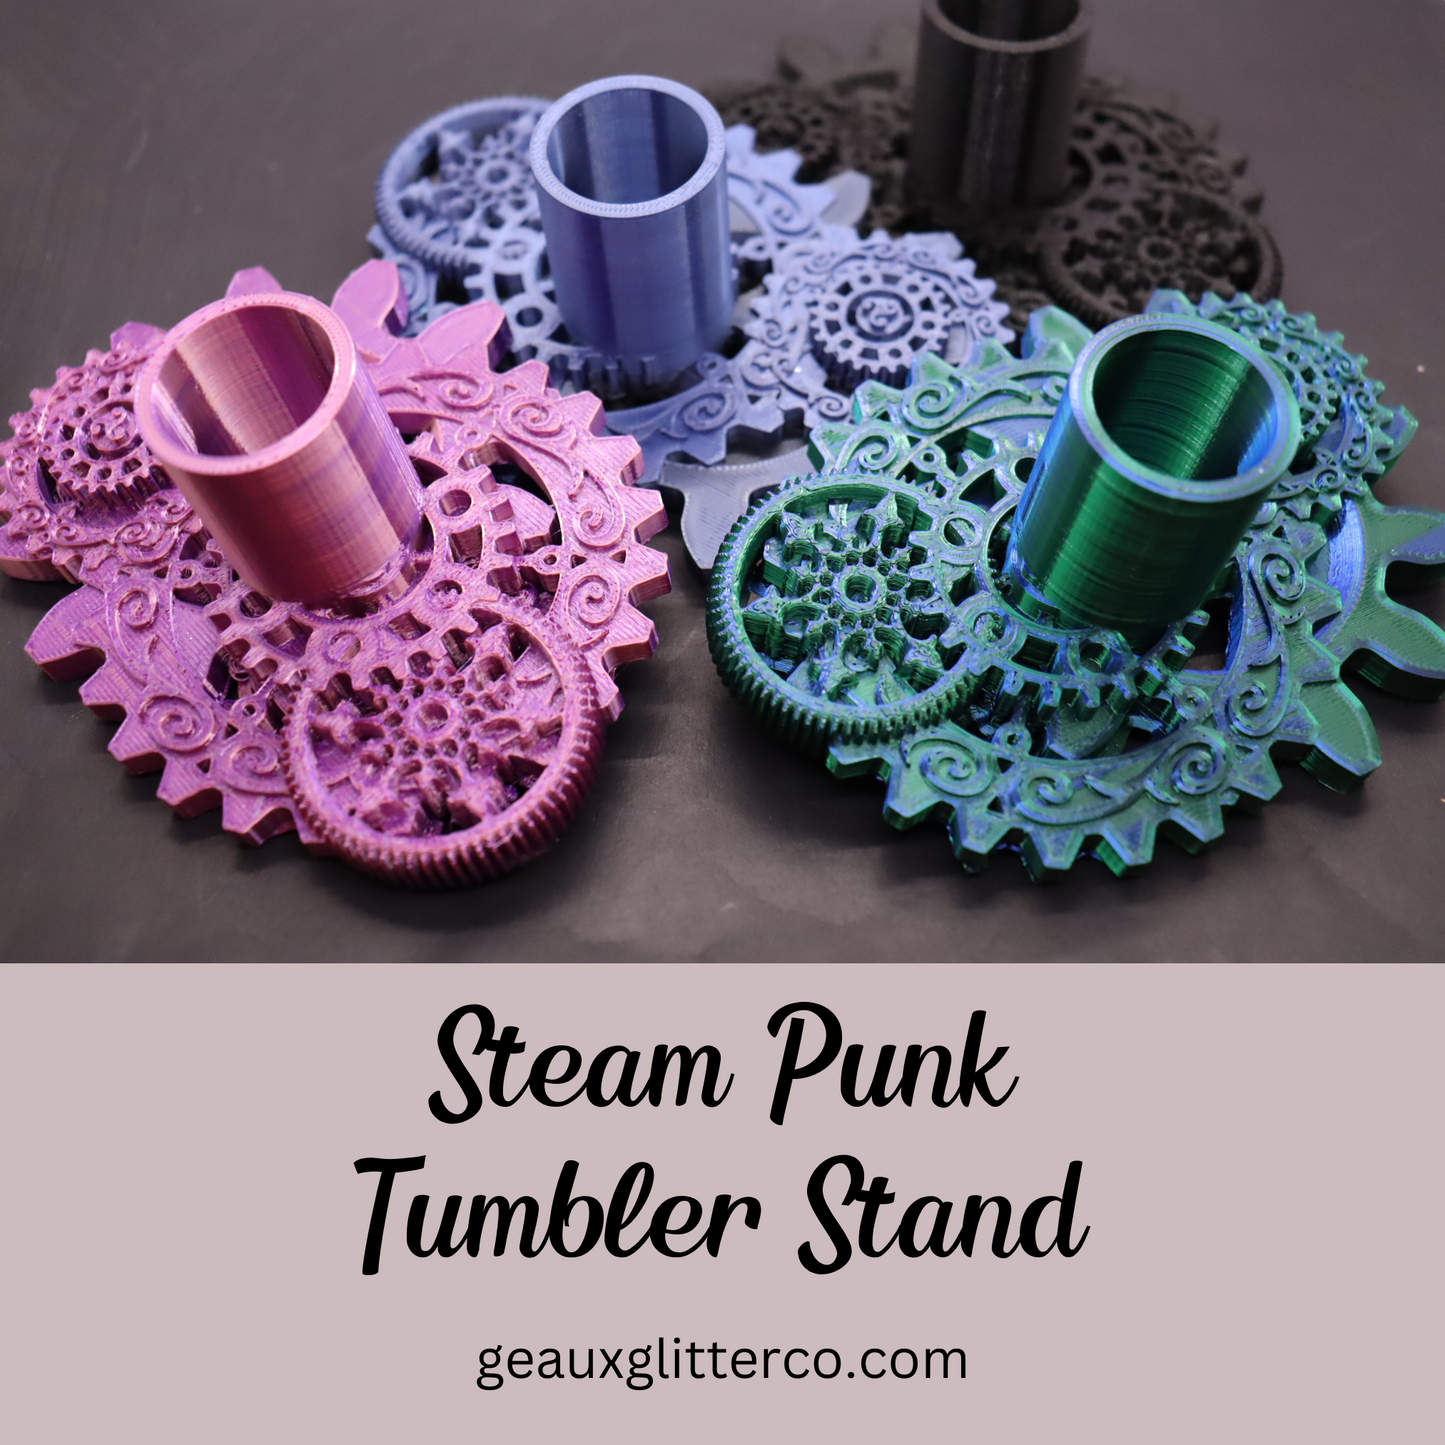 Steam Punk Tumbler Cup Drying Stand - Available in 1/2 inch or 3/4 inch